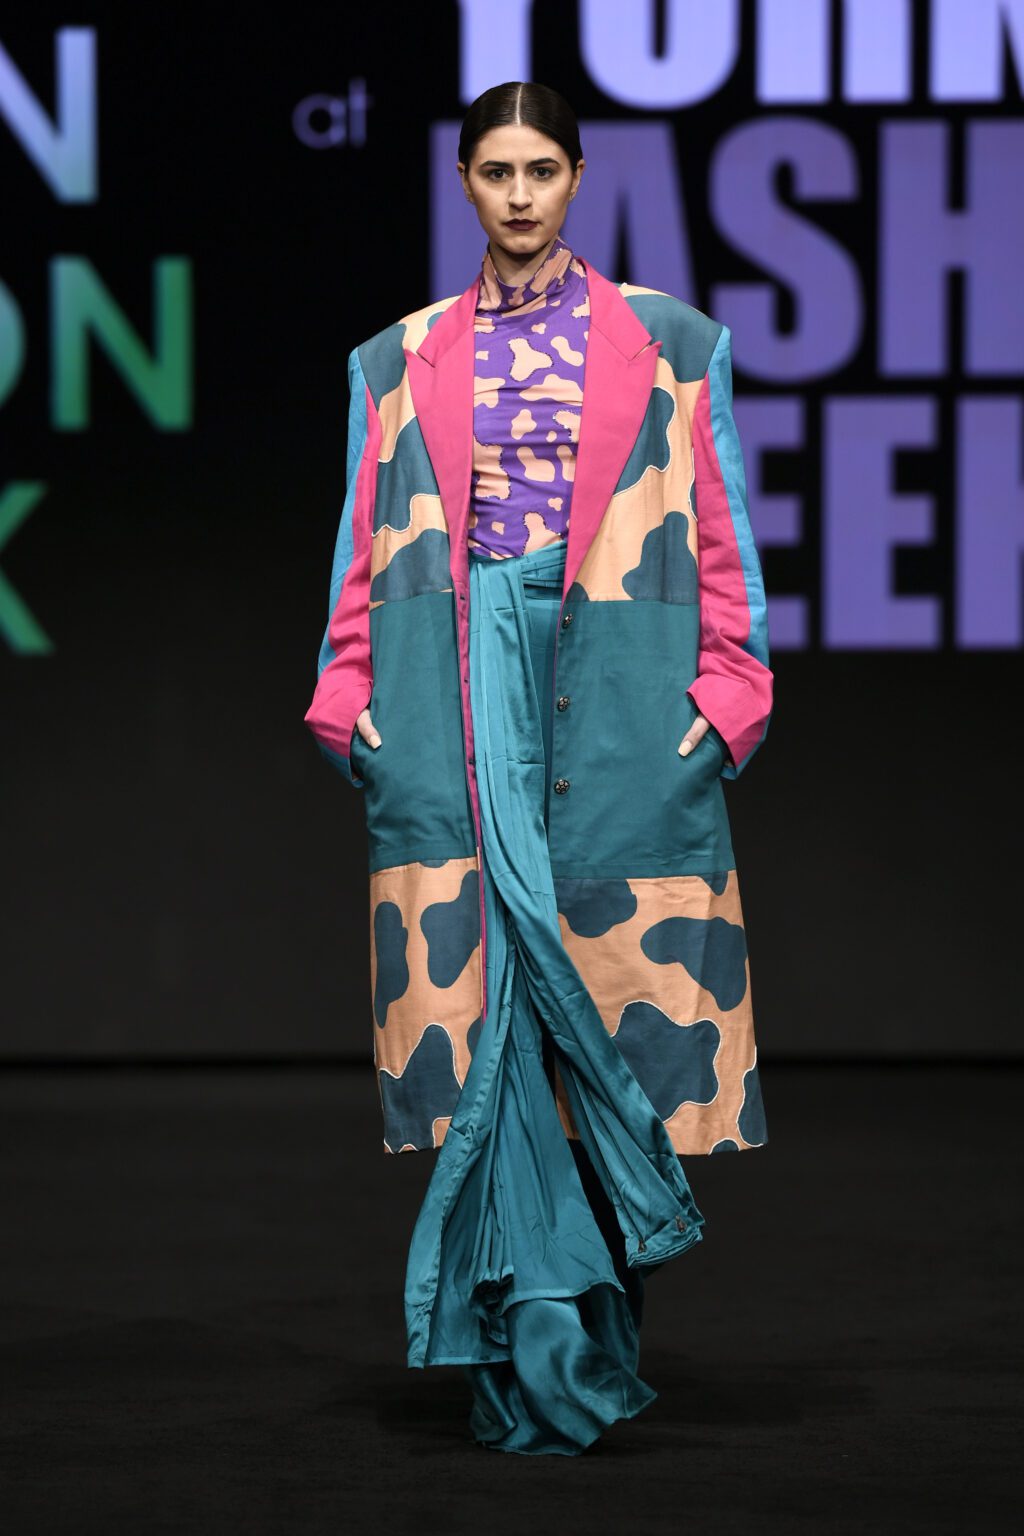 NEW YORK, NEW YORK - FEBRUARY 12: Gena Dickon walks the runway wearing INIFD-LST India Fashion Trunk - At New York Fashion Week Powered By Art Hearts Fashion at The Ziegfeld Ballroom on February 12, 2022 in New York City. (Photo by Arun Nevader/Getty Images for Art Hearts Fashion)